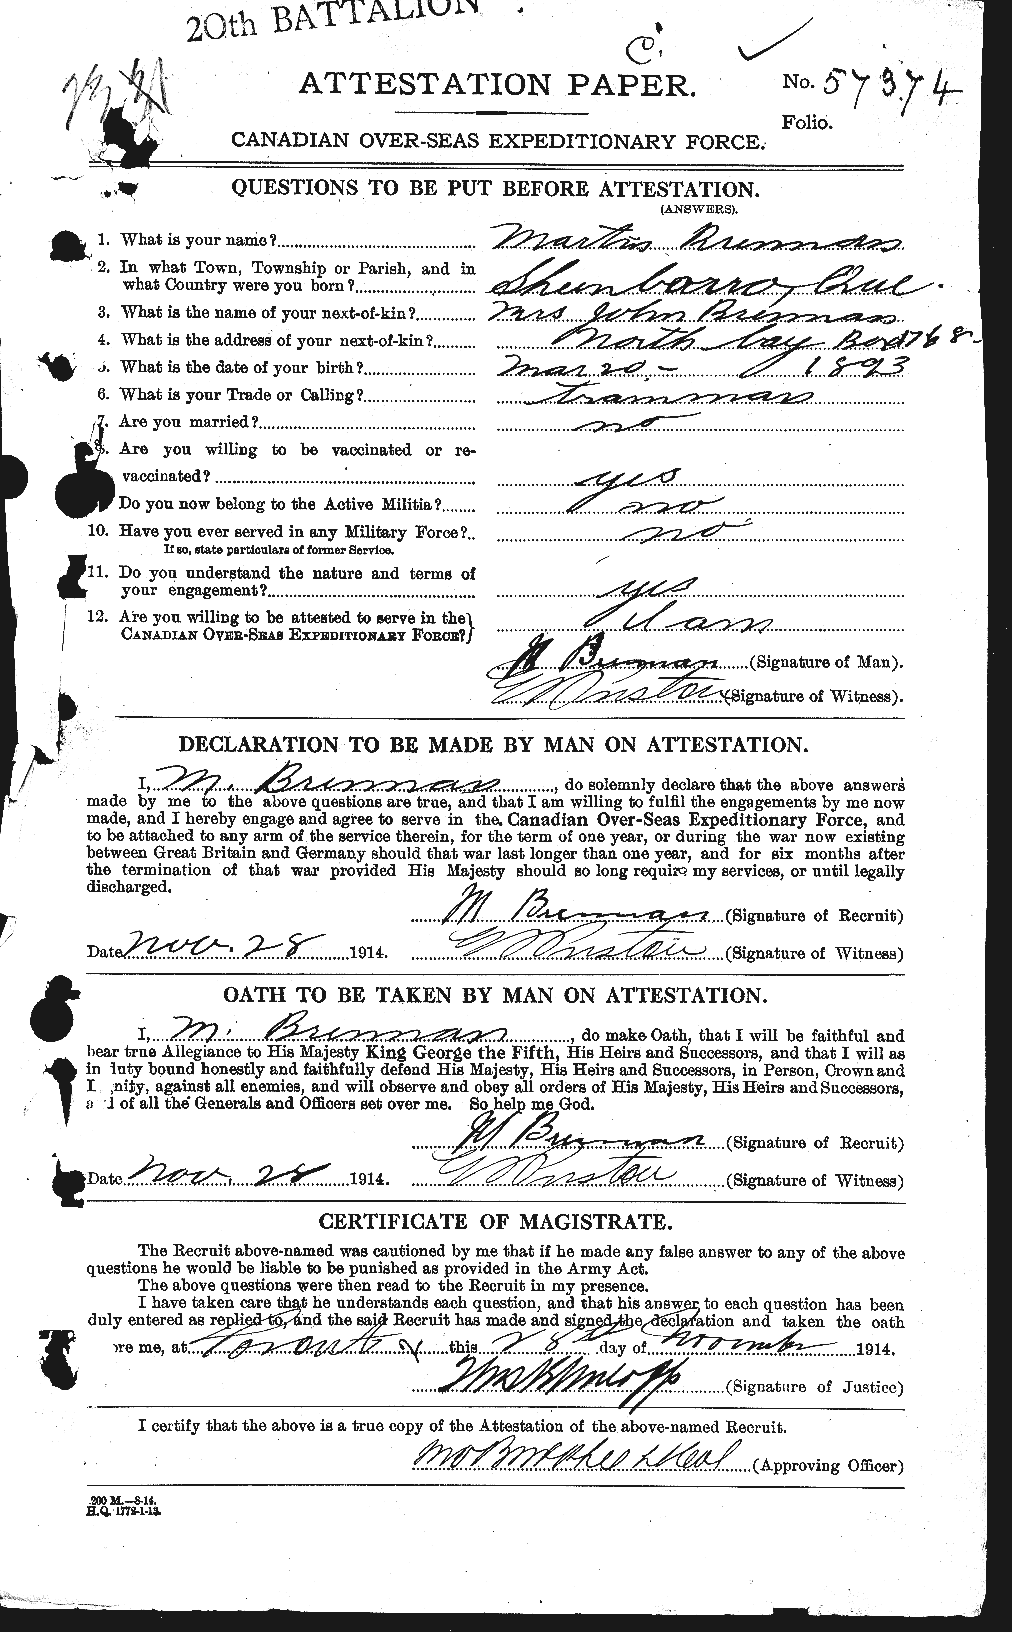 Personnel Records of the First World War - CEF 260121a